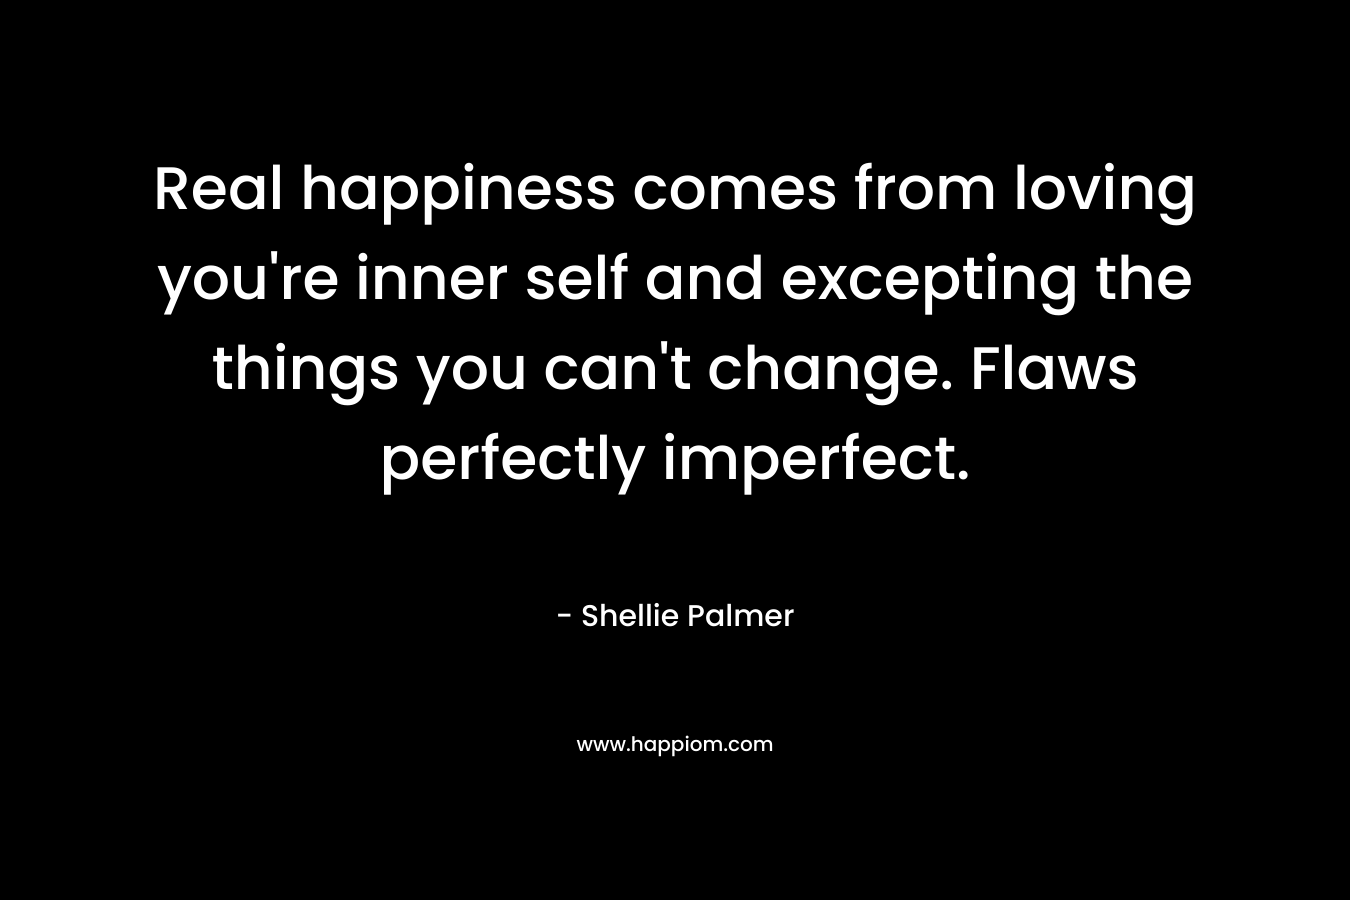 Real happiness comes from loving you’re inner self and excepting the things you can’t change. Flaws perfectly imperfect. – Shellie Palmer